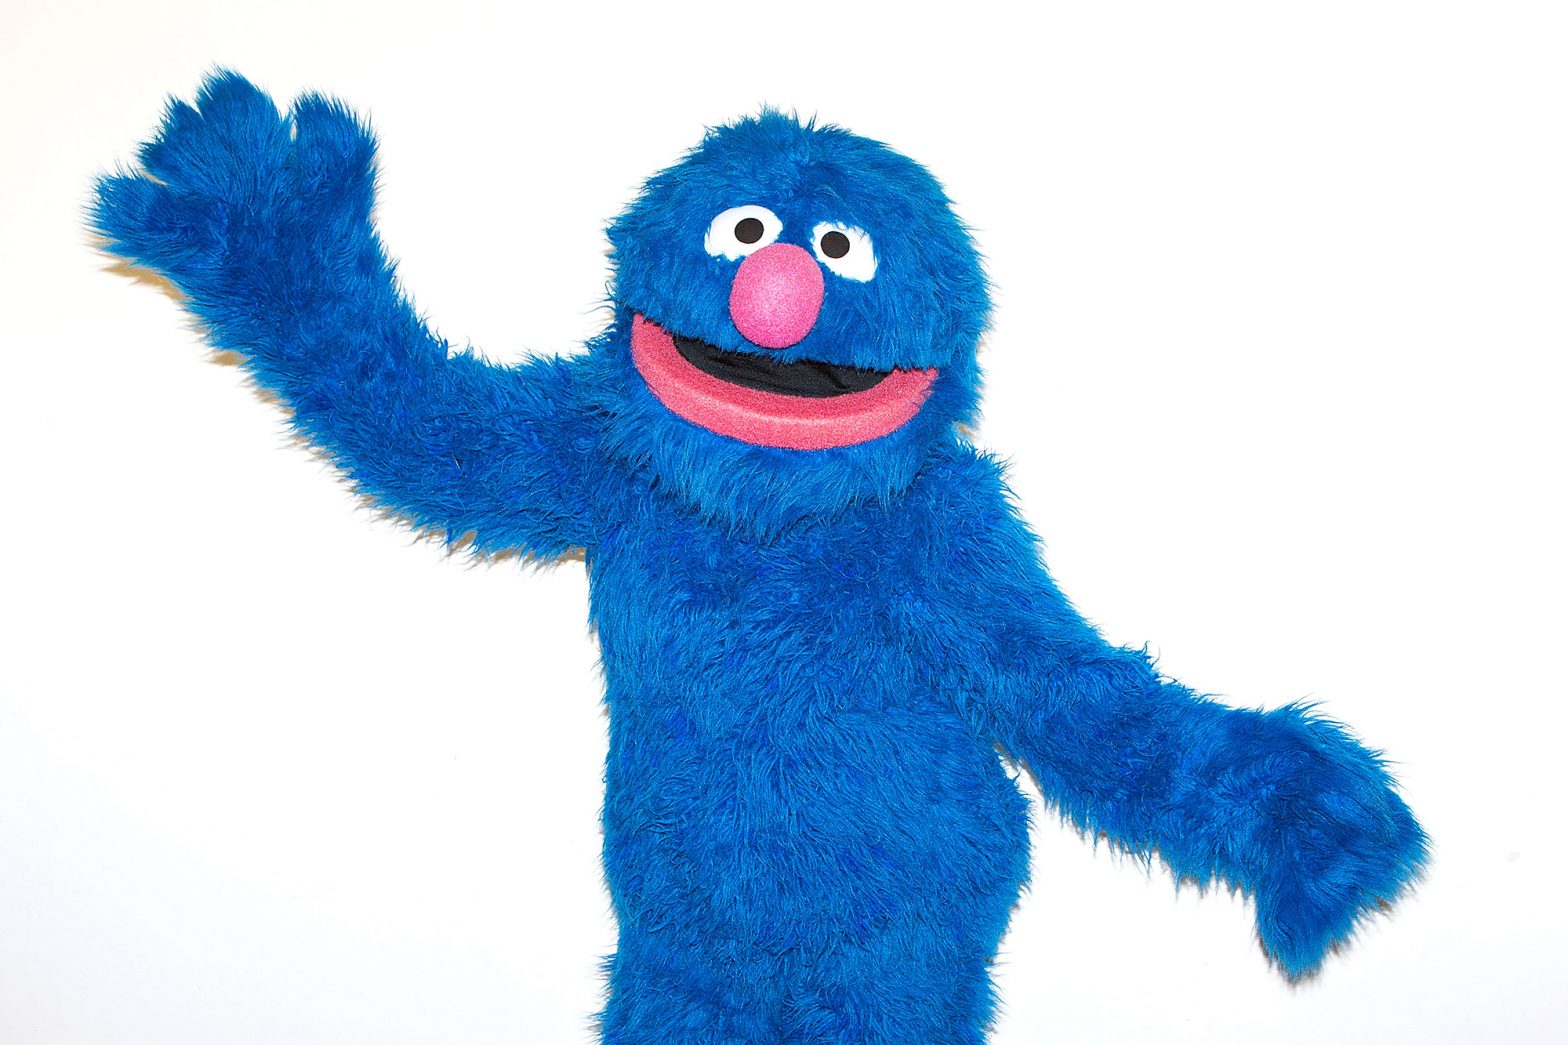 Did Grover drop the F-bomb?